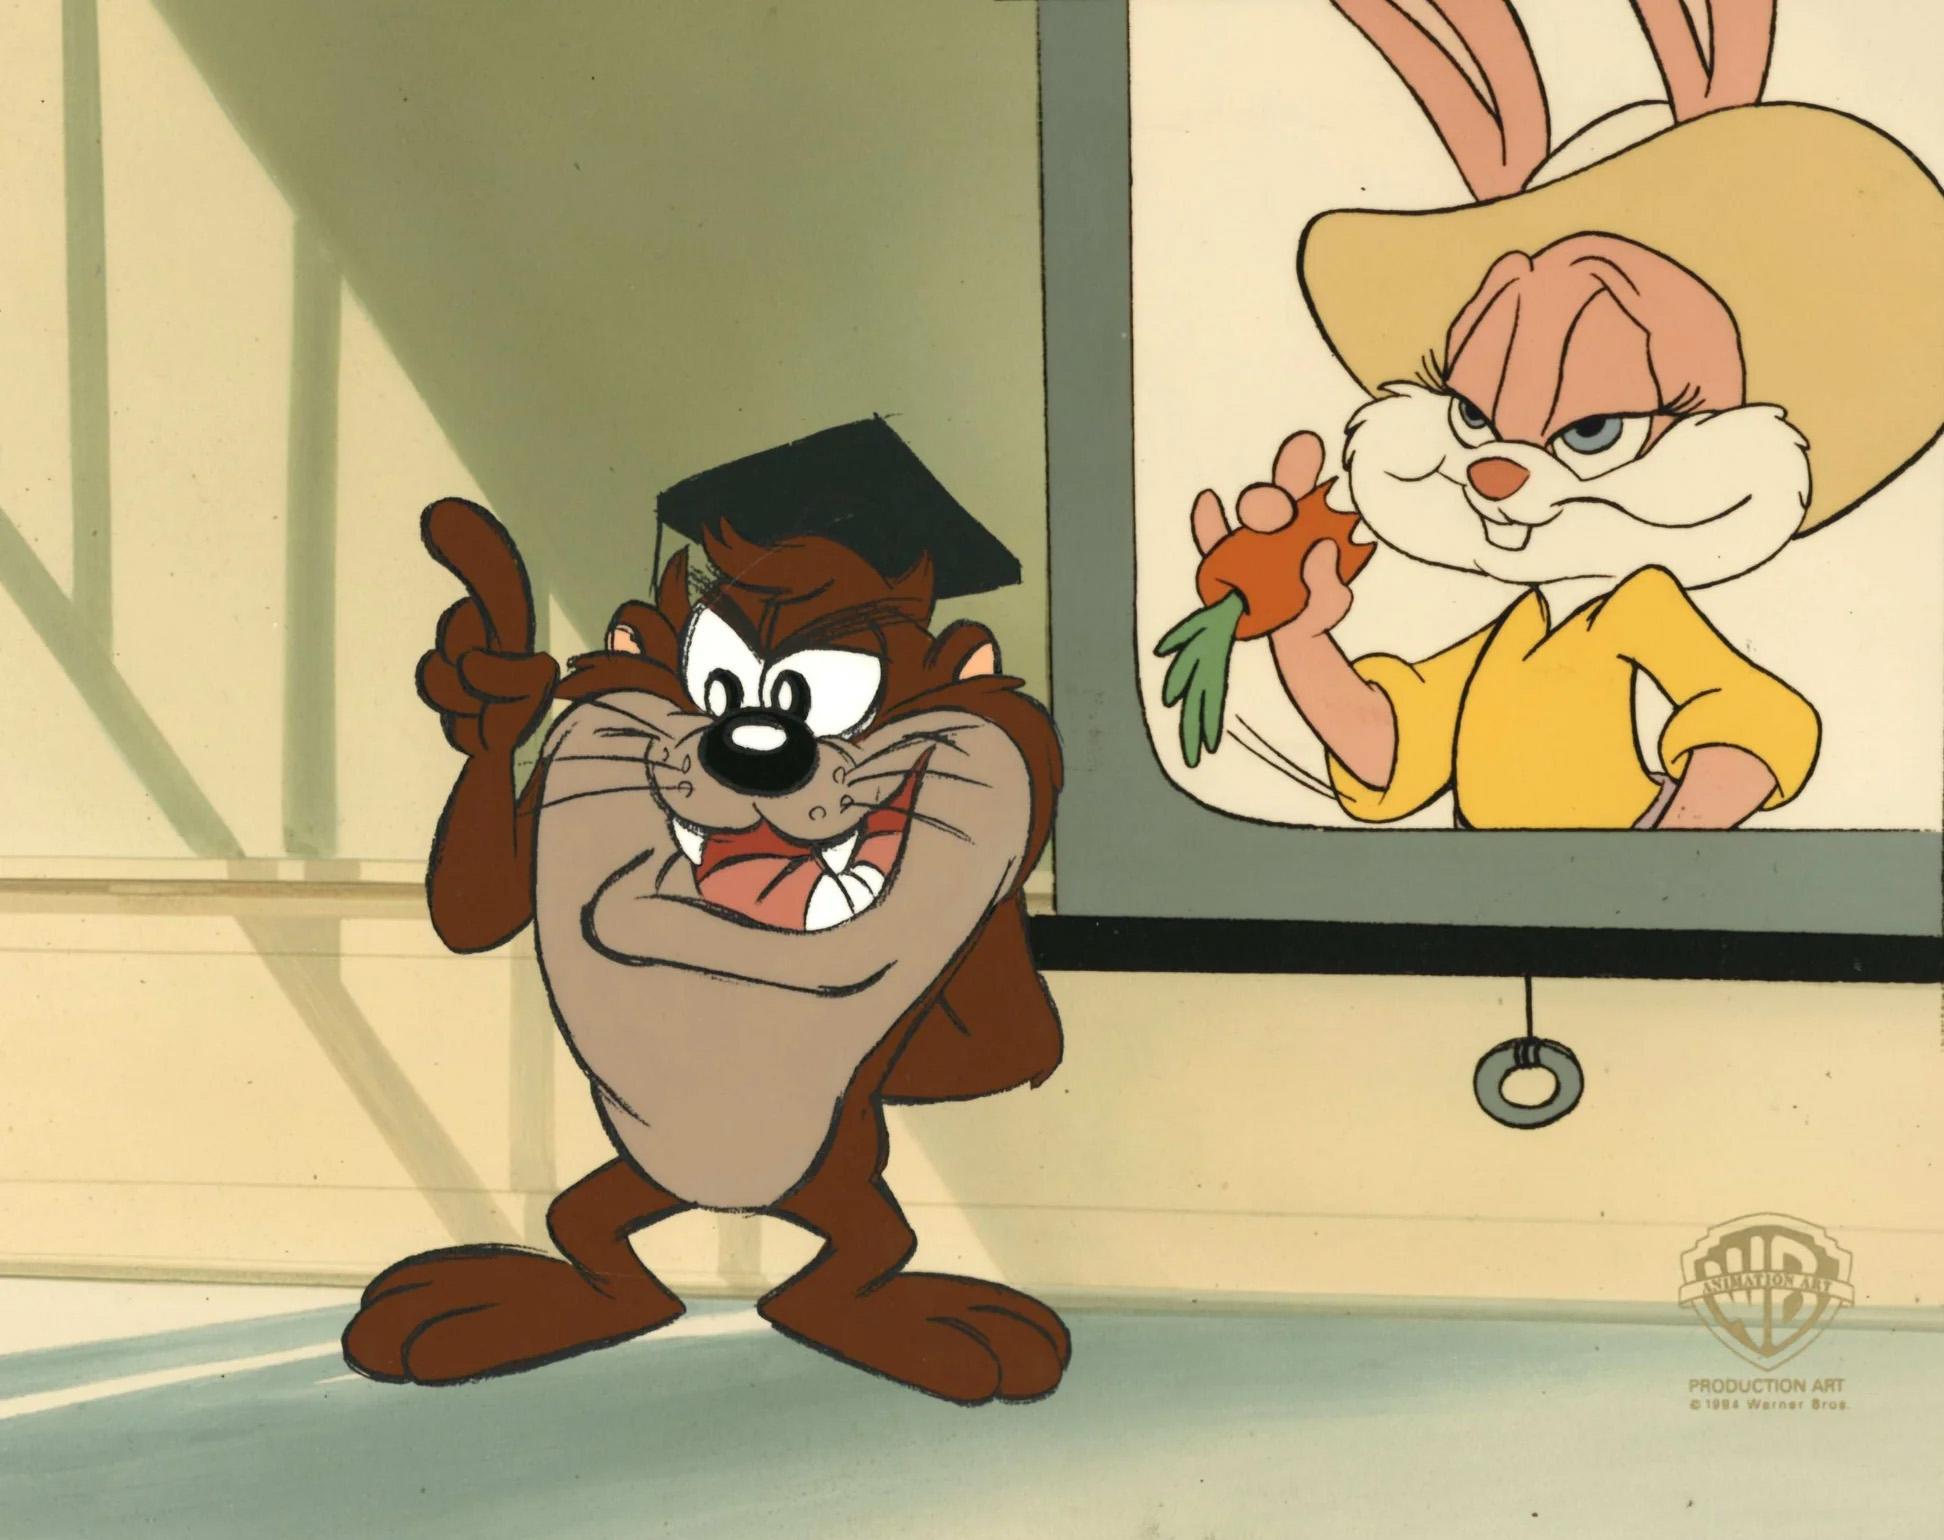 Tiny Toons Original Production Cel: Taz and Babs Bunny